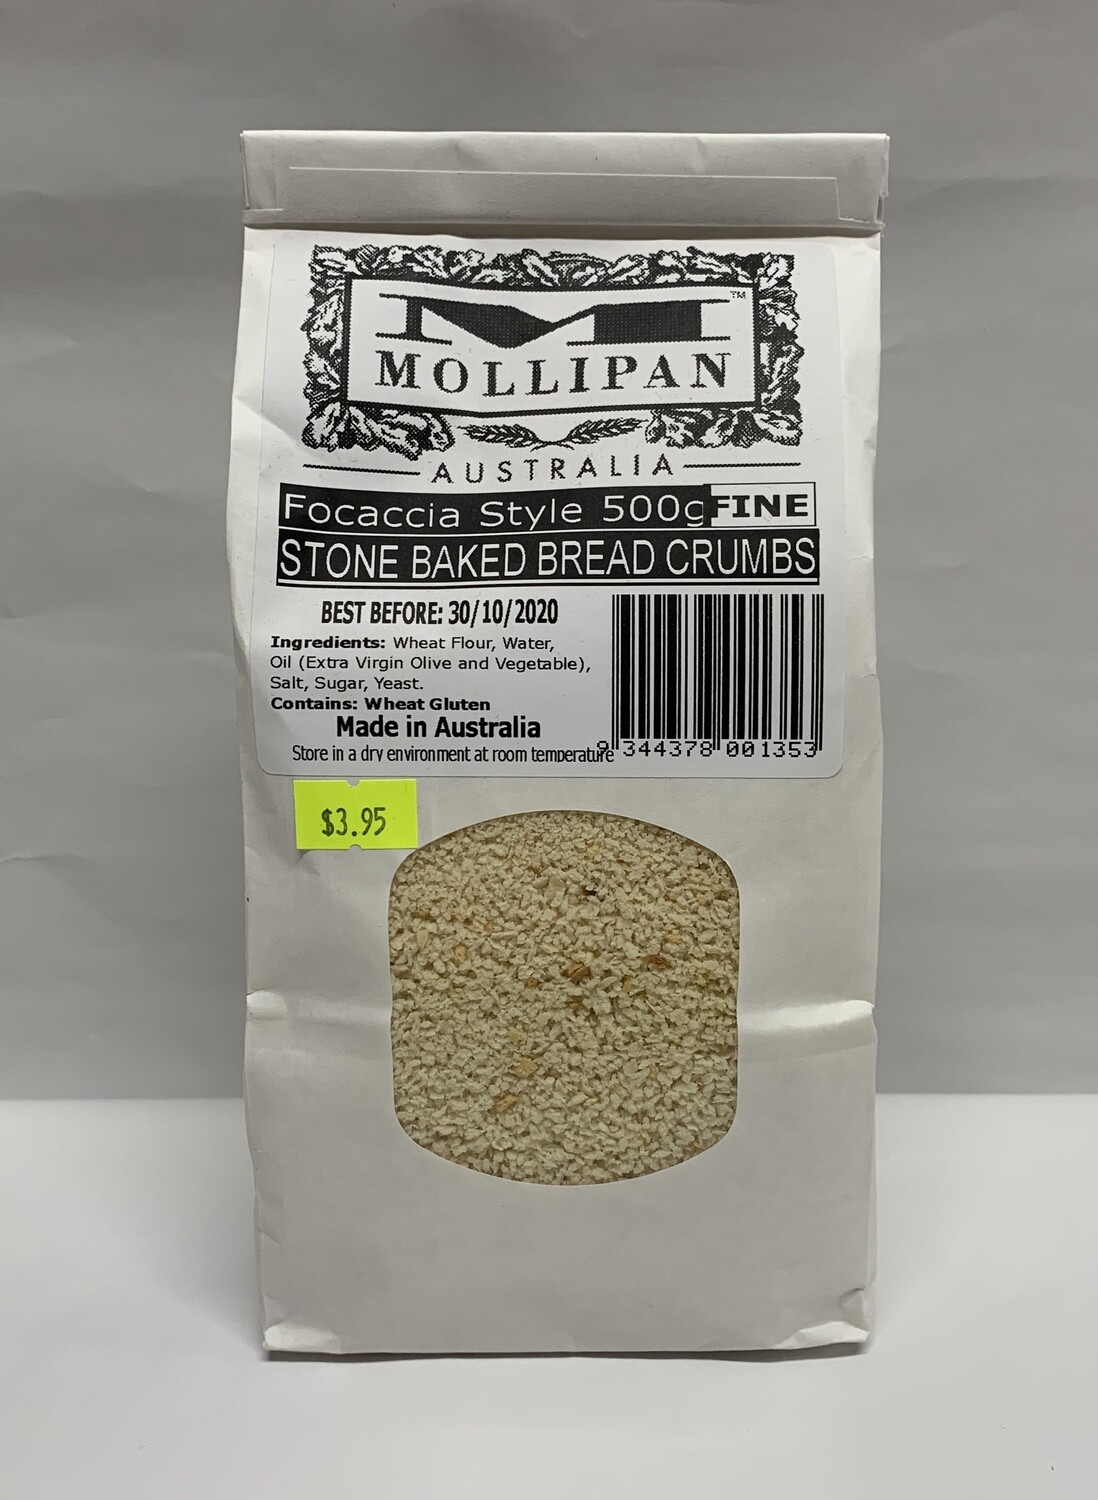 Stone Baked Bread Crumbs (500g)